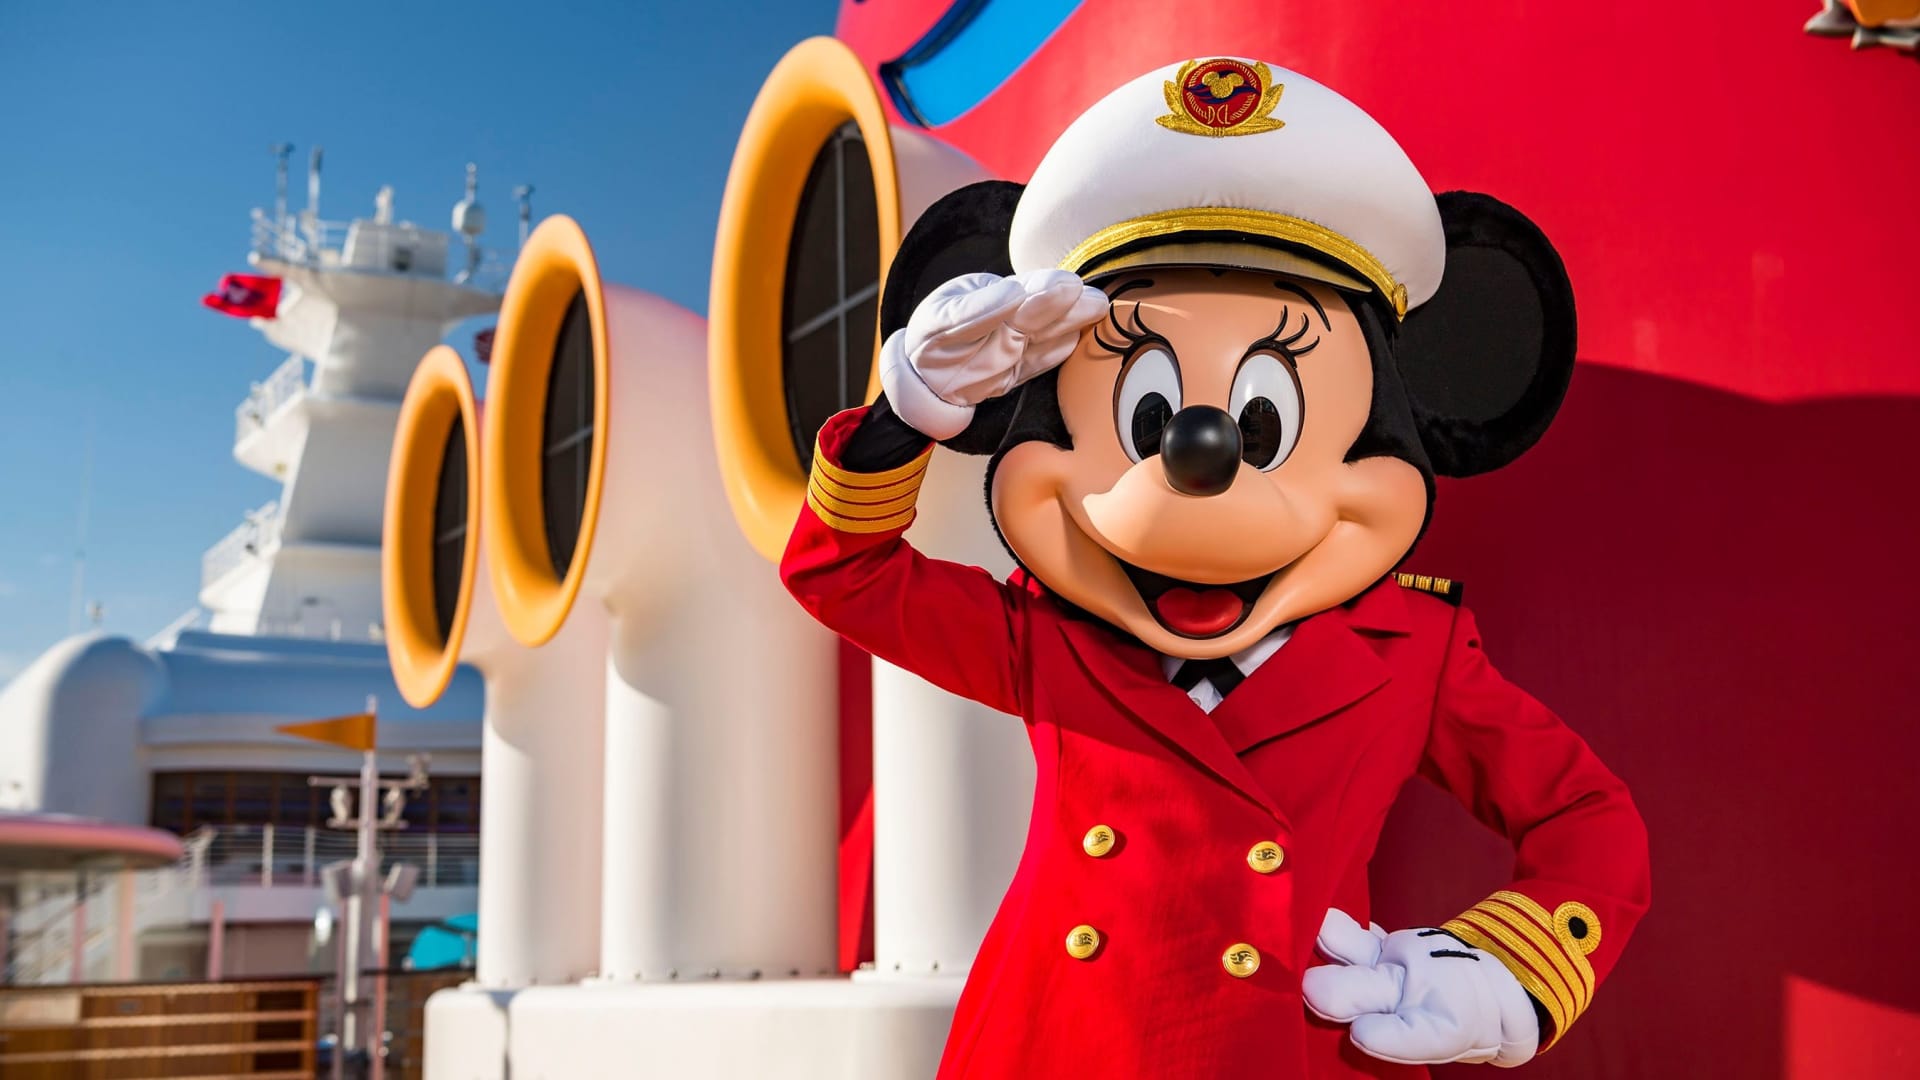 Captain Minnie Mouse, ‘Frozen’ and a $5,000 Star Wars cocktail: Disney pins big hopes on new Wish cruise ship